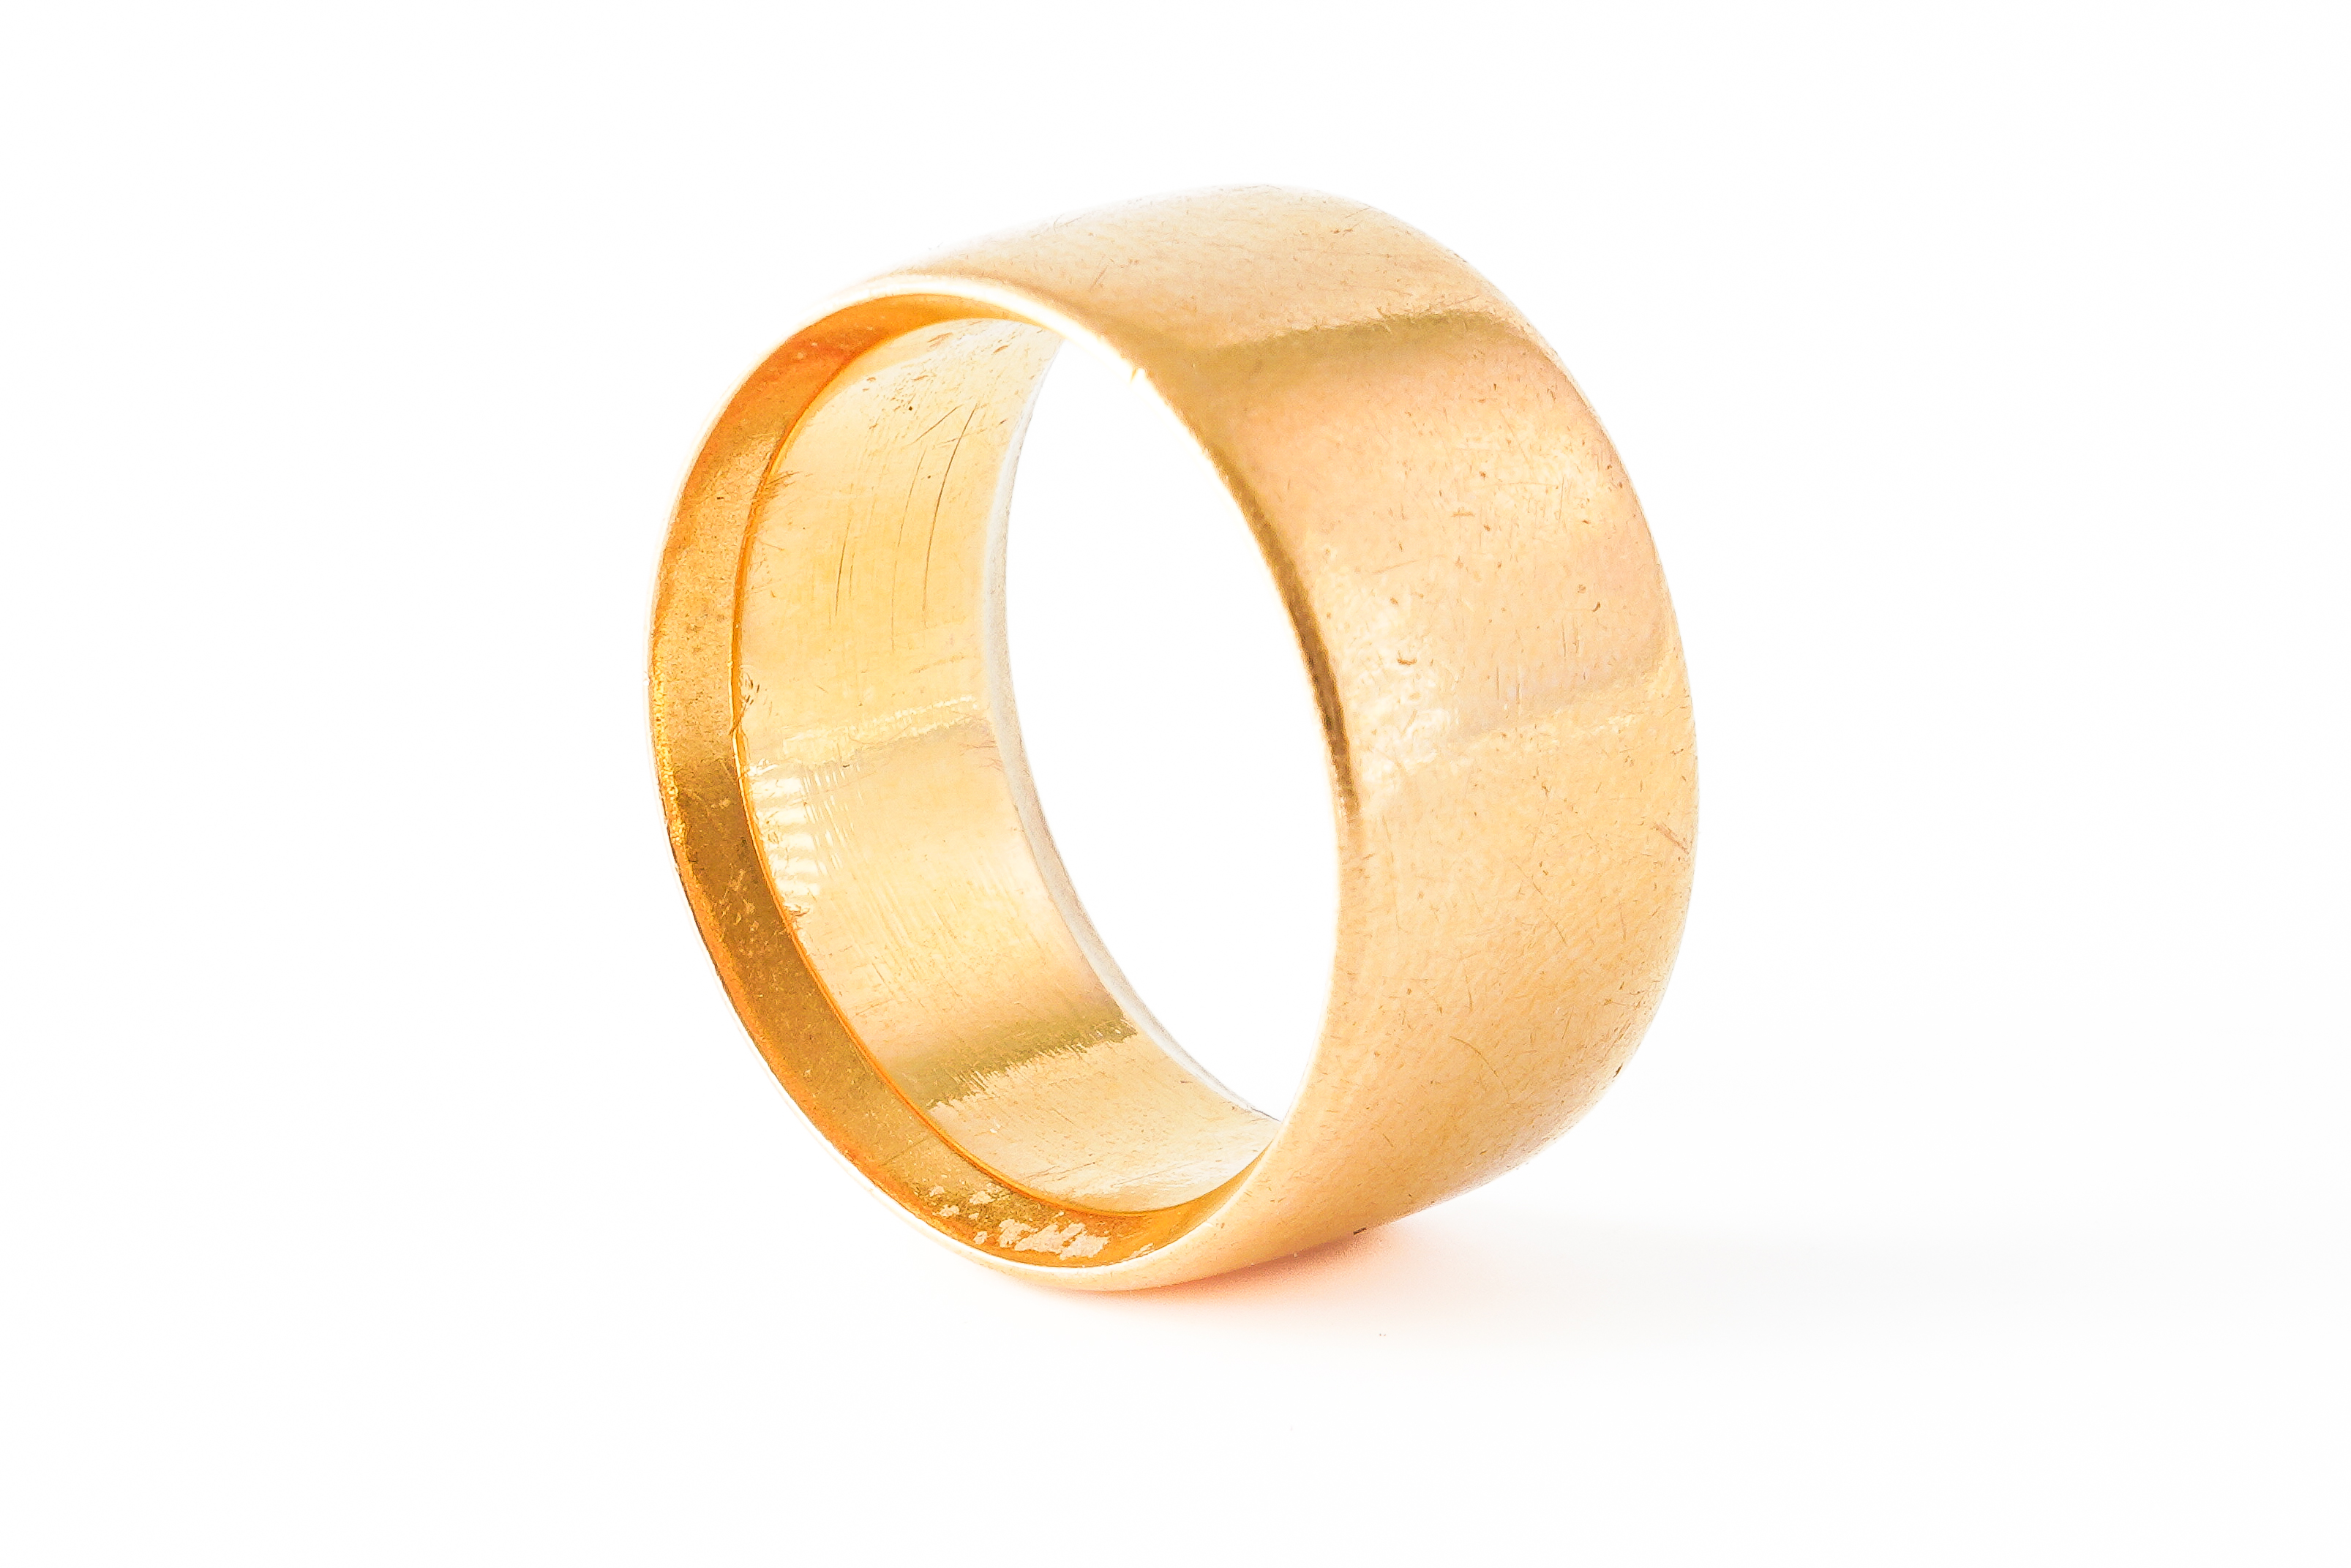 A 22CT GOLD WIDE BAND WEDDING RING - Image 2 of 3